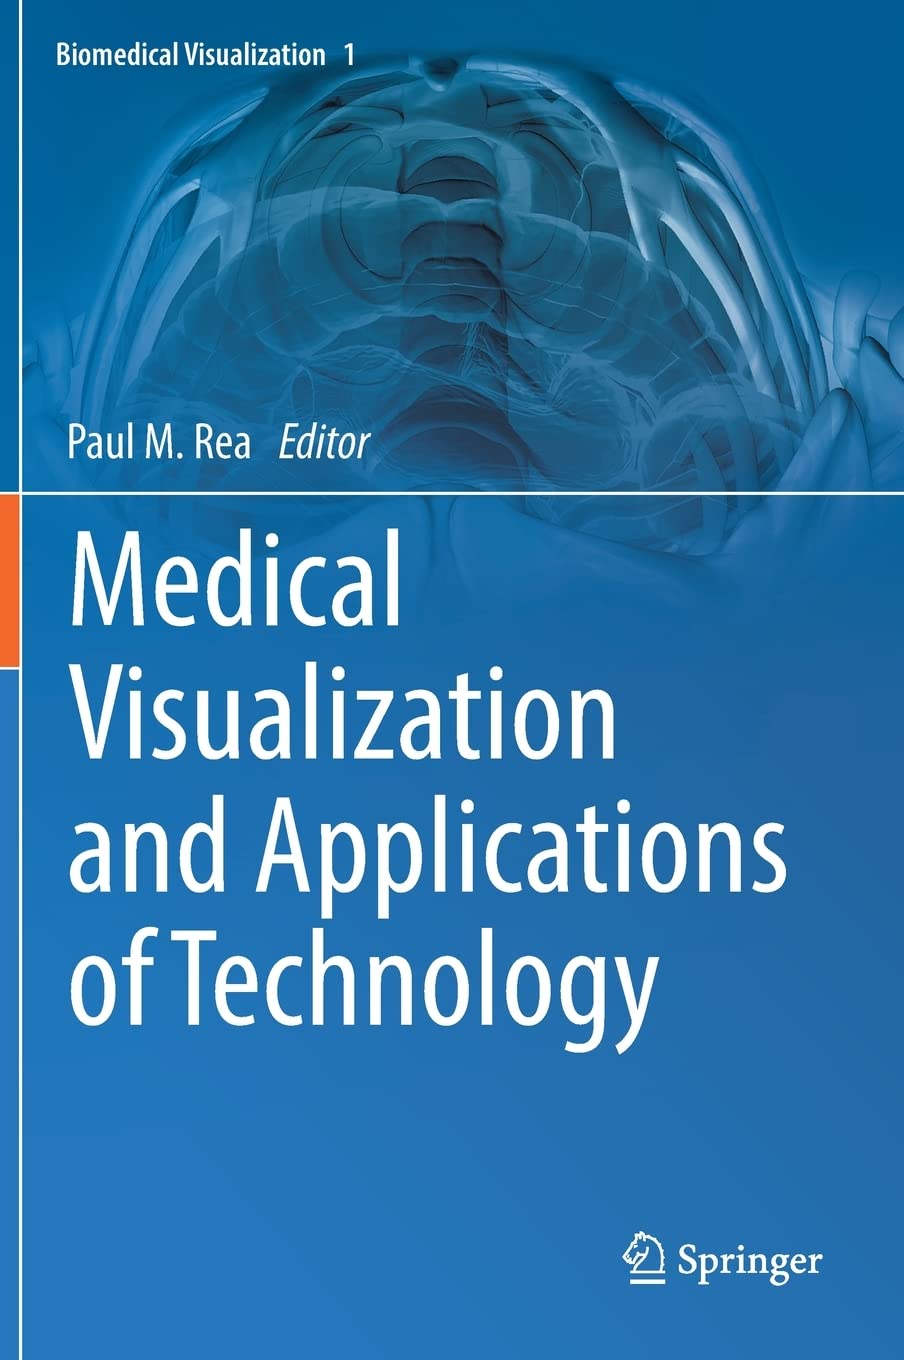 Medical Visualization and Applications of Technology (Biomedical Visualization, 1) by Paul M. Rea 